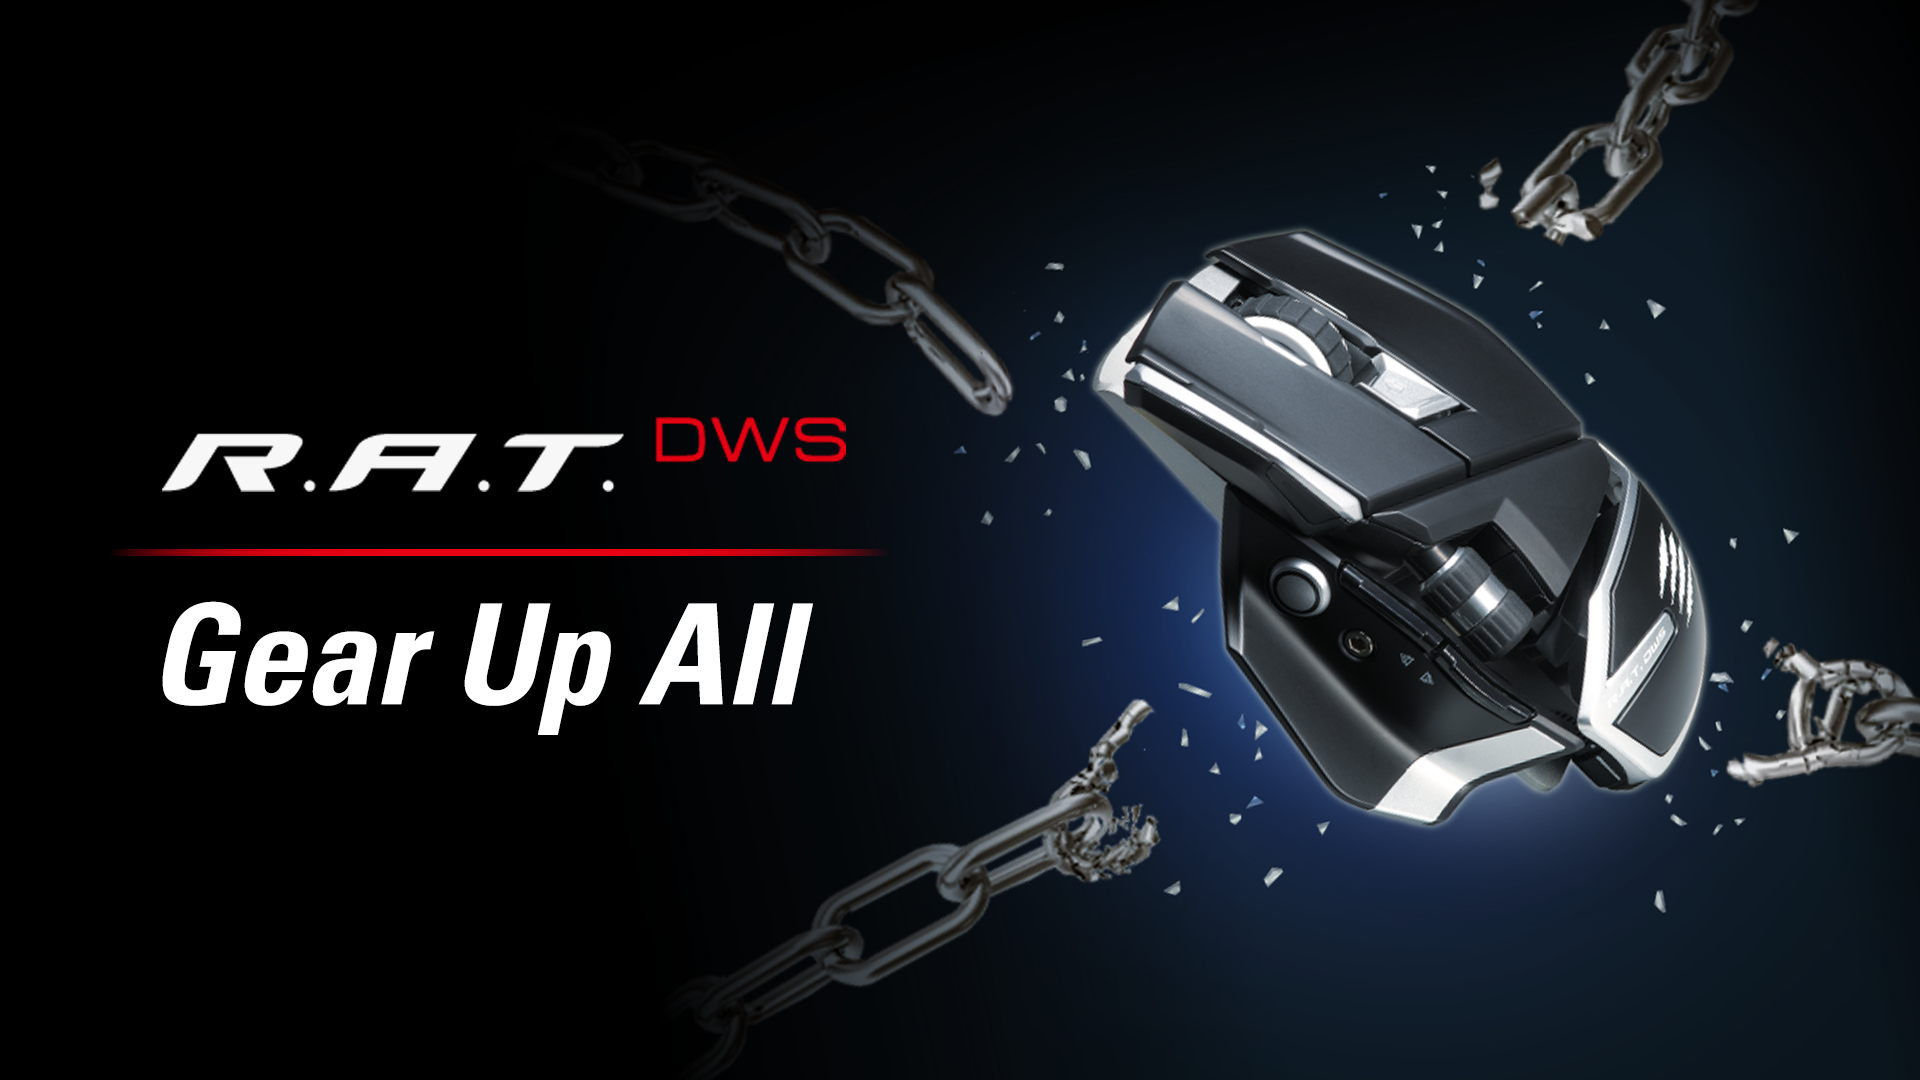 Dual-mode wireless connections, hyper-responsive DAKOTA switch, diversified accessories, and longevity of power. 